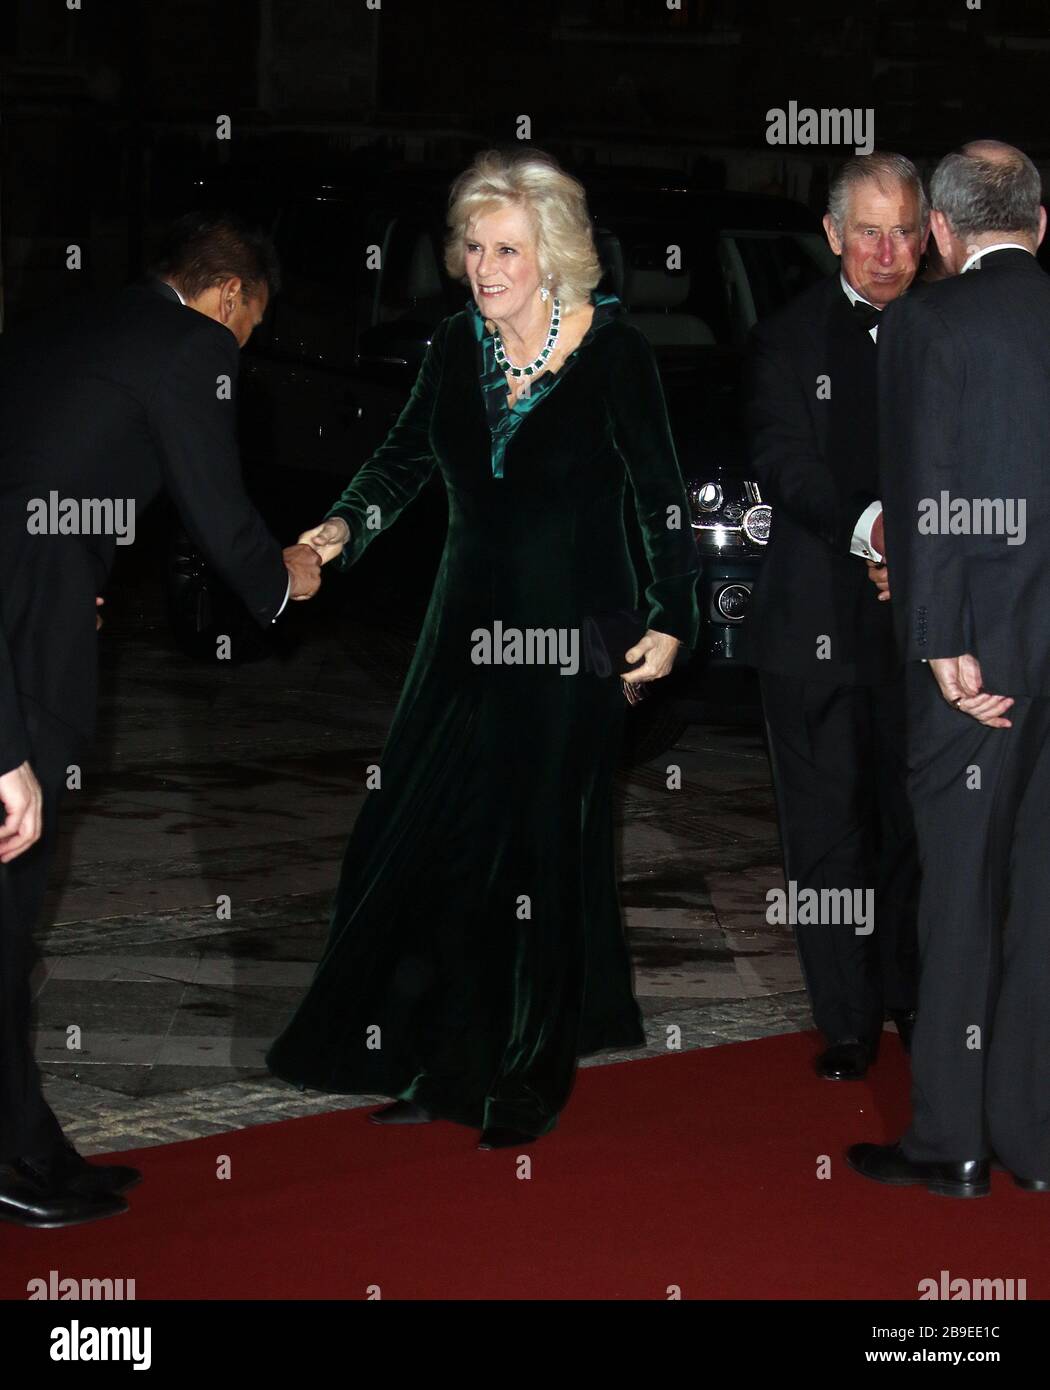 Feb 02, 2017 - London, England, UK - The British Asian Trust reception and dinner, Guildhall - Red Carpet Arrivals Photo Shows: Camilla, Duchess Of Co Stock Photo